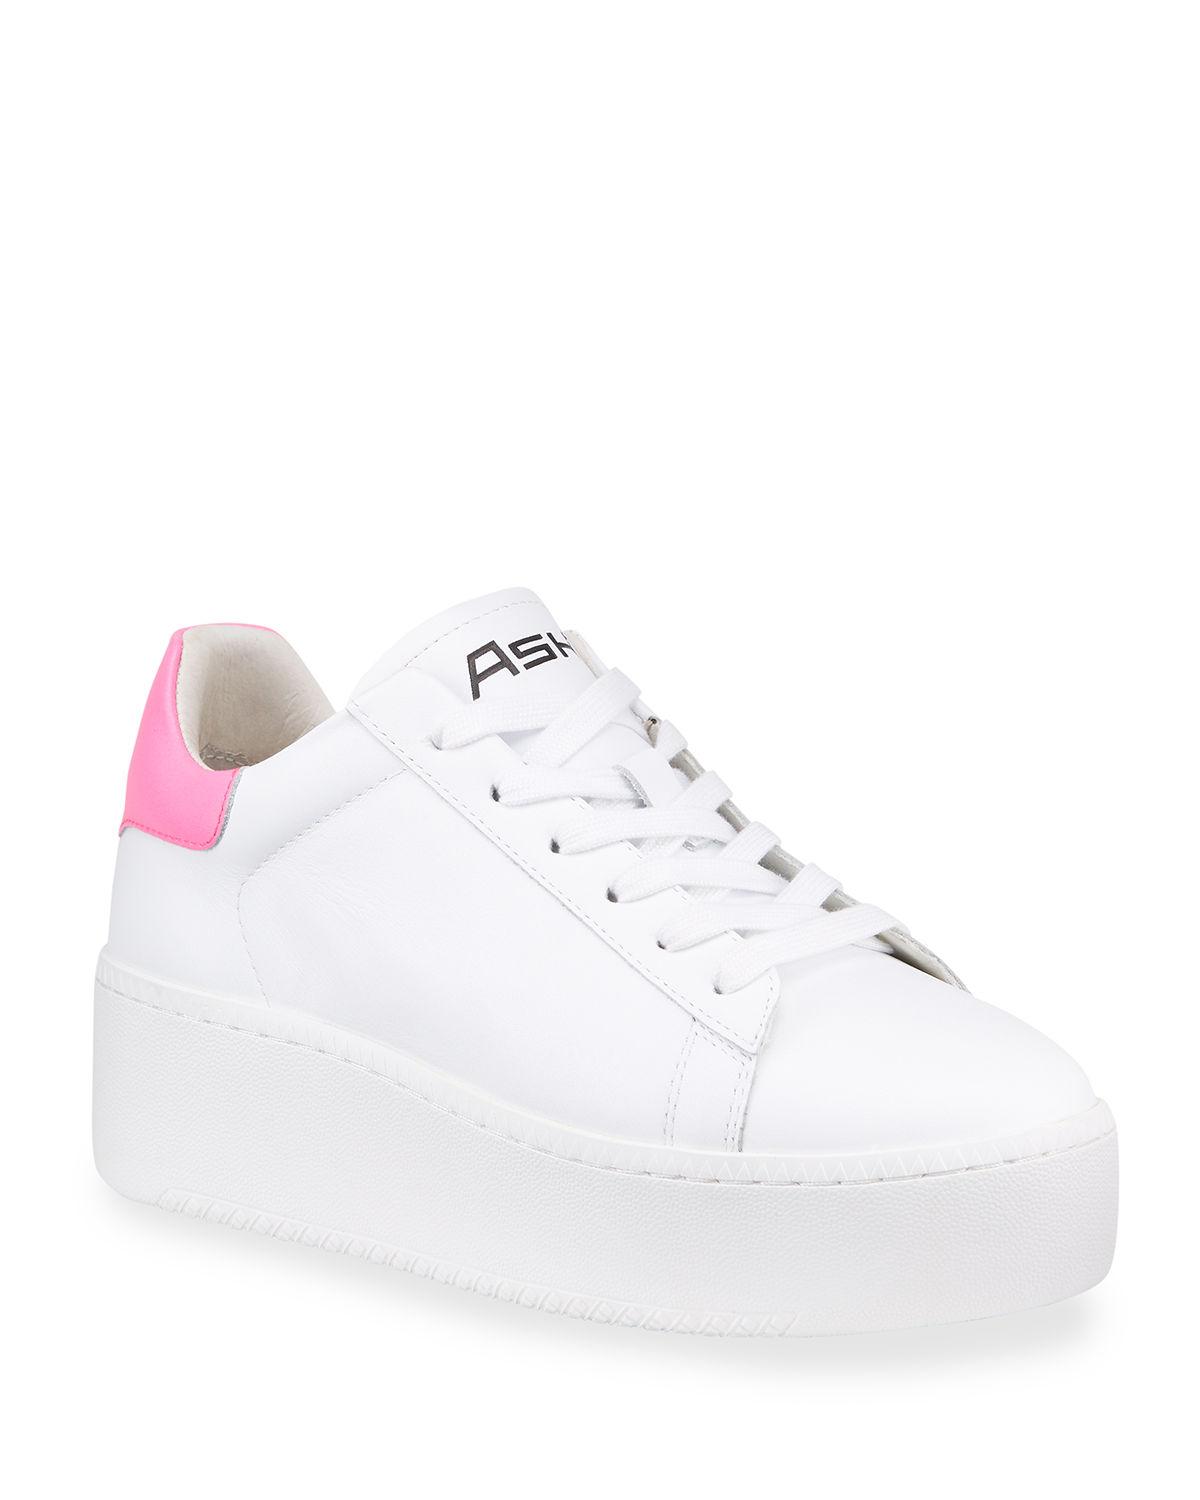 Ash Leather Two-tone Platform Sneakers in White Yellow (White) - Lyst